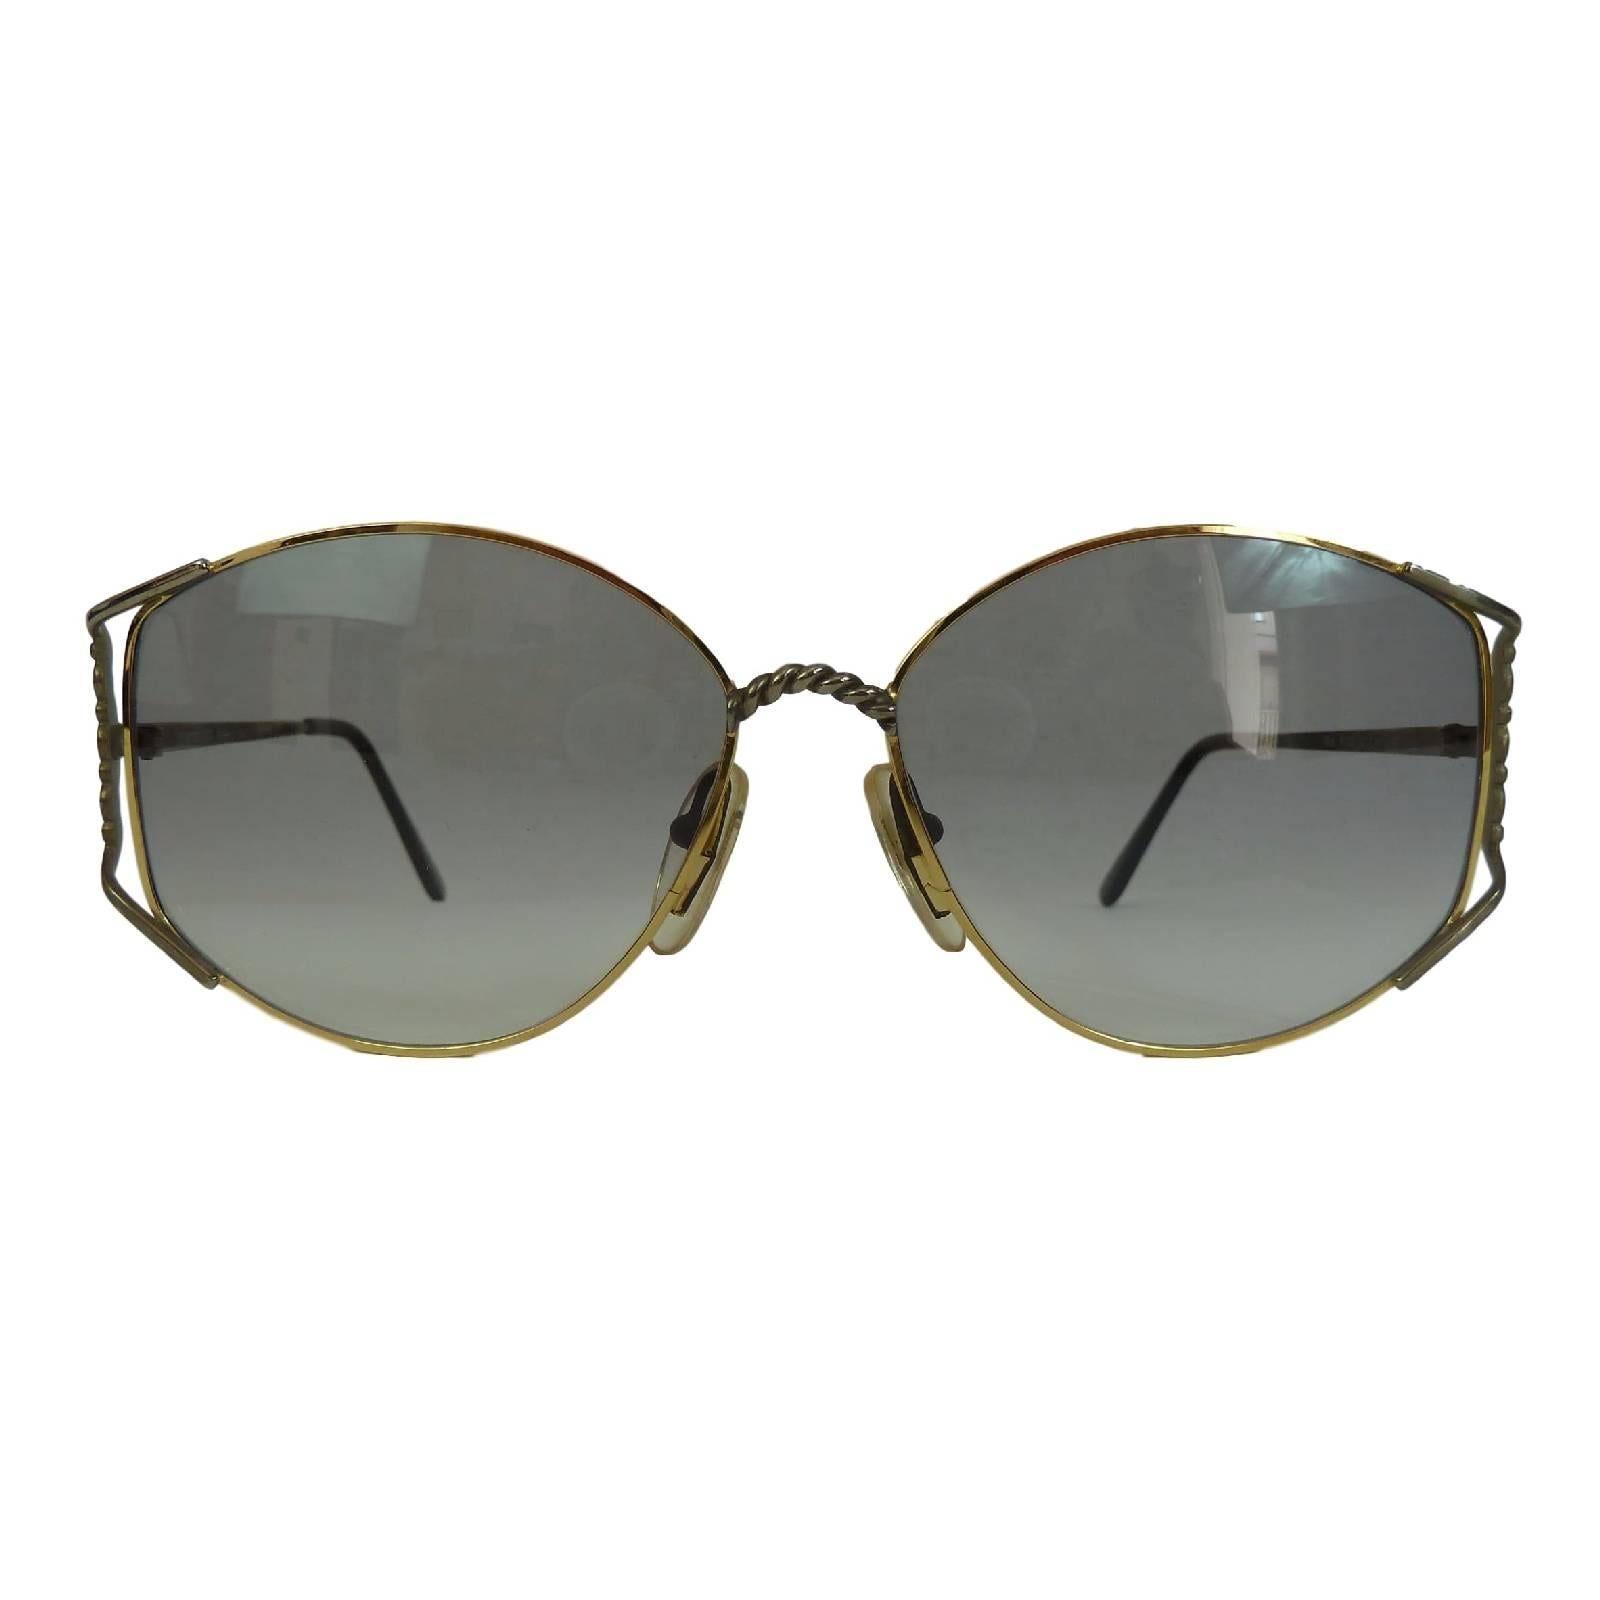 Mimmina vintage sunglasses mod. R 119 shell in metal gold color frame shape gray made in italy for women’s. Mimmina is excellent vintage fashion icon.

Eye size: 57 mm
Bridge: 14 mm
Temple Lenght: 135 mm

Material: metal
Color: gold and gray
Model: